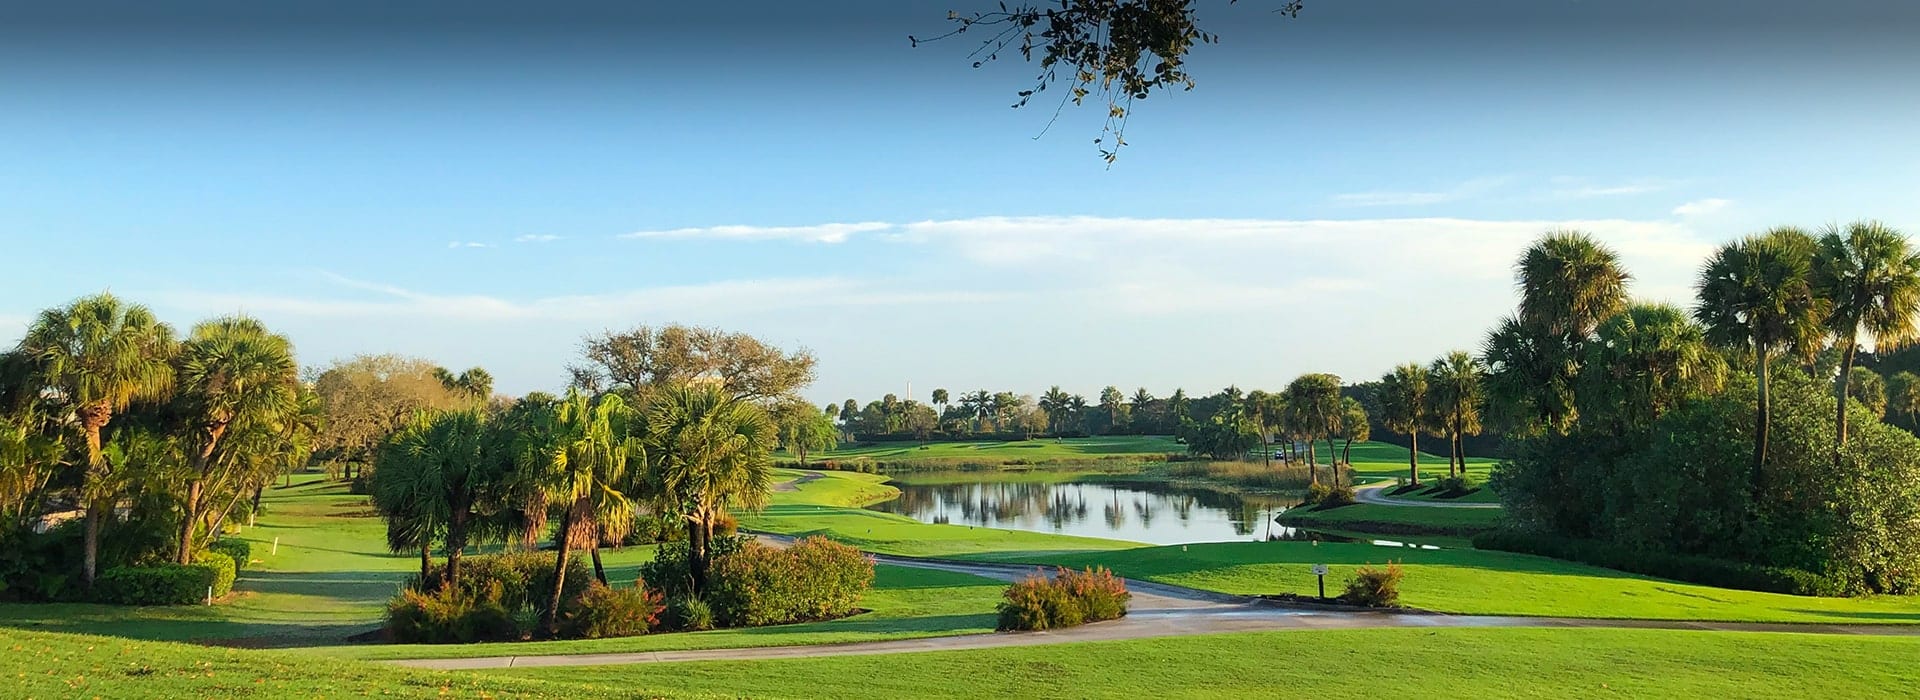 Tranquil lake inside one of Boca West's golf courses with palm trees and bushes surrounding it